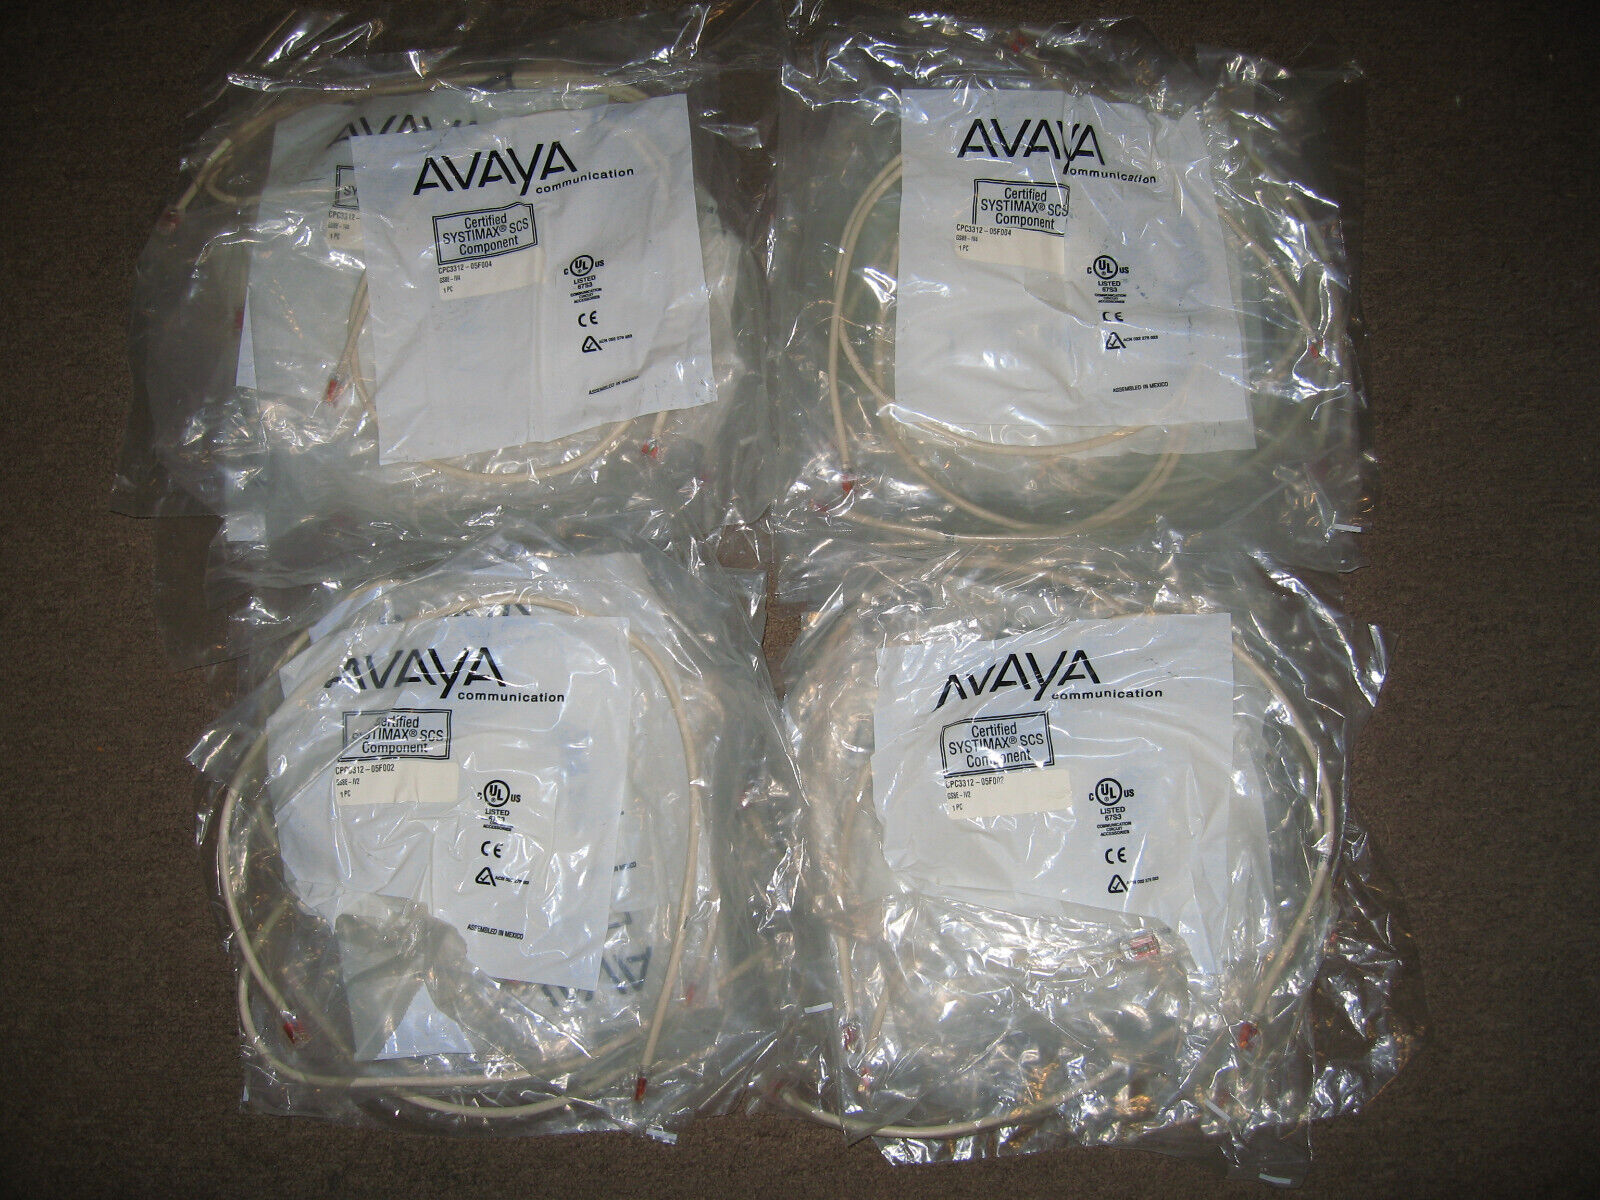 Lot 25 Mixed New Commscope Systimax White Cat 6 Patch Cables (15)-4ft & (10)-2ft